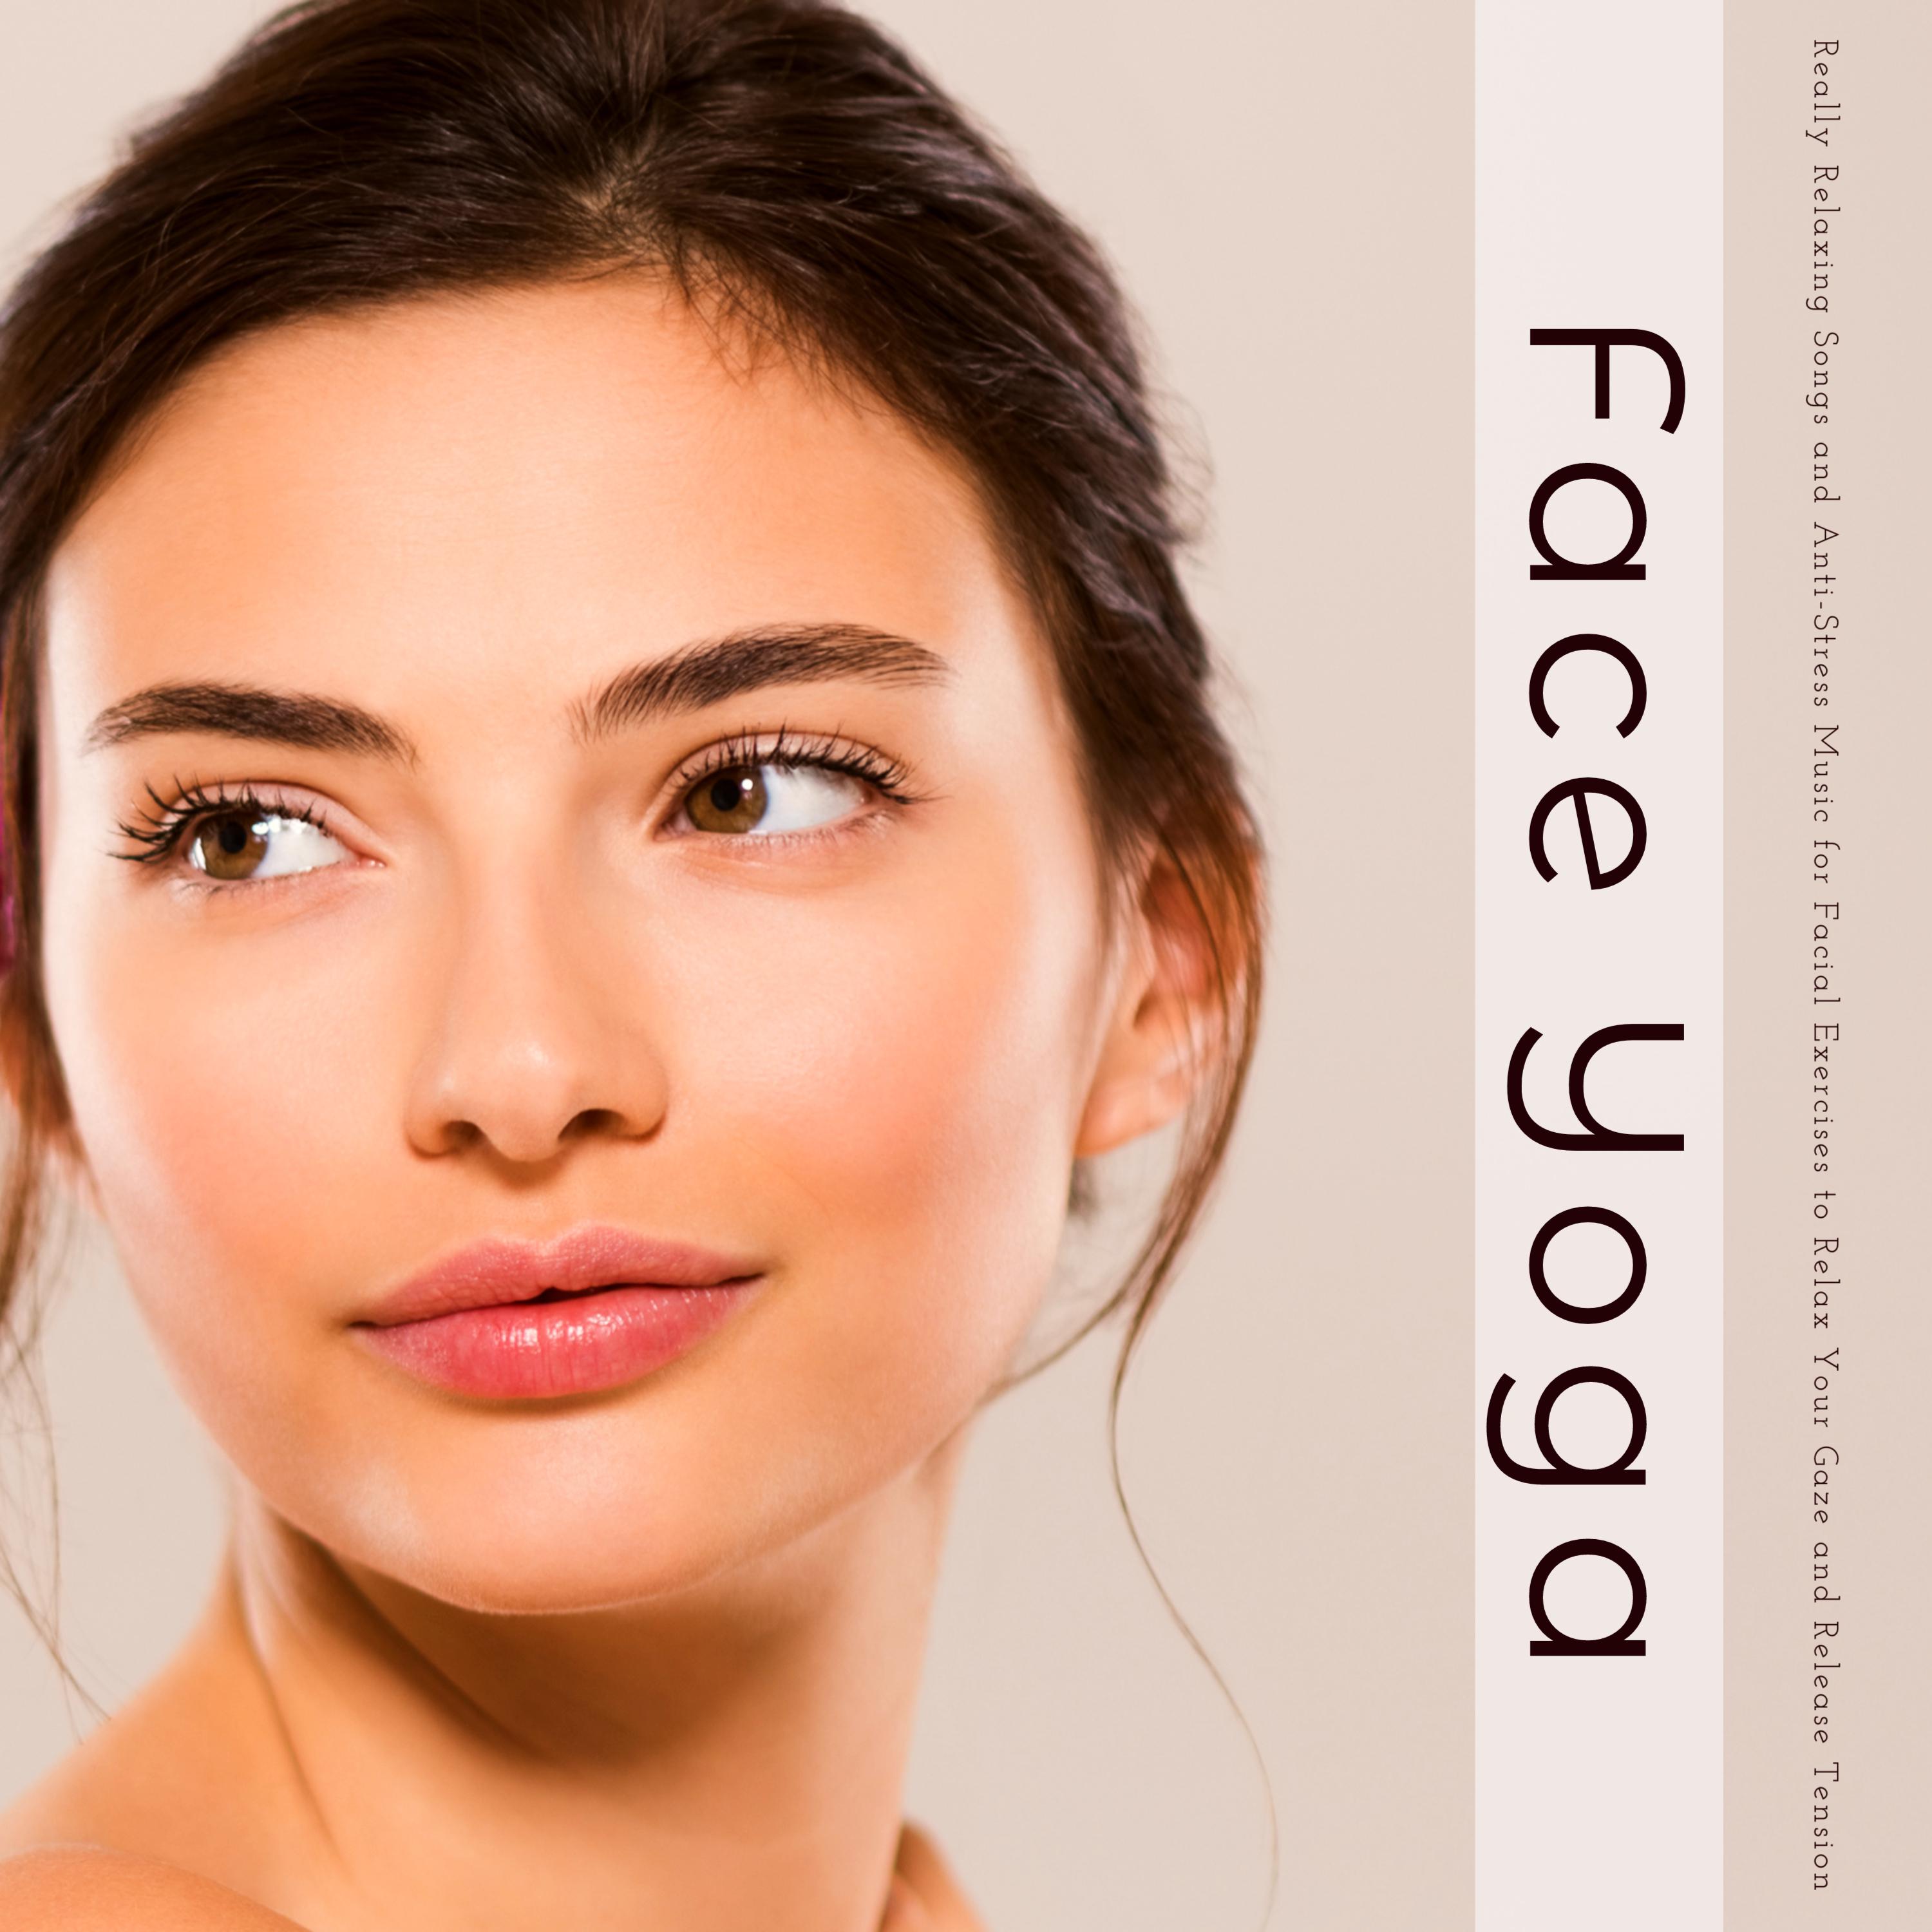 Face Yoga  Really Relaxing Songs and AntiStress Music for Facial Exercises to Relax Your Gaze and Release Tension